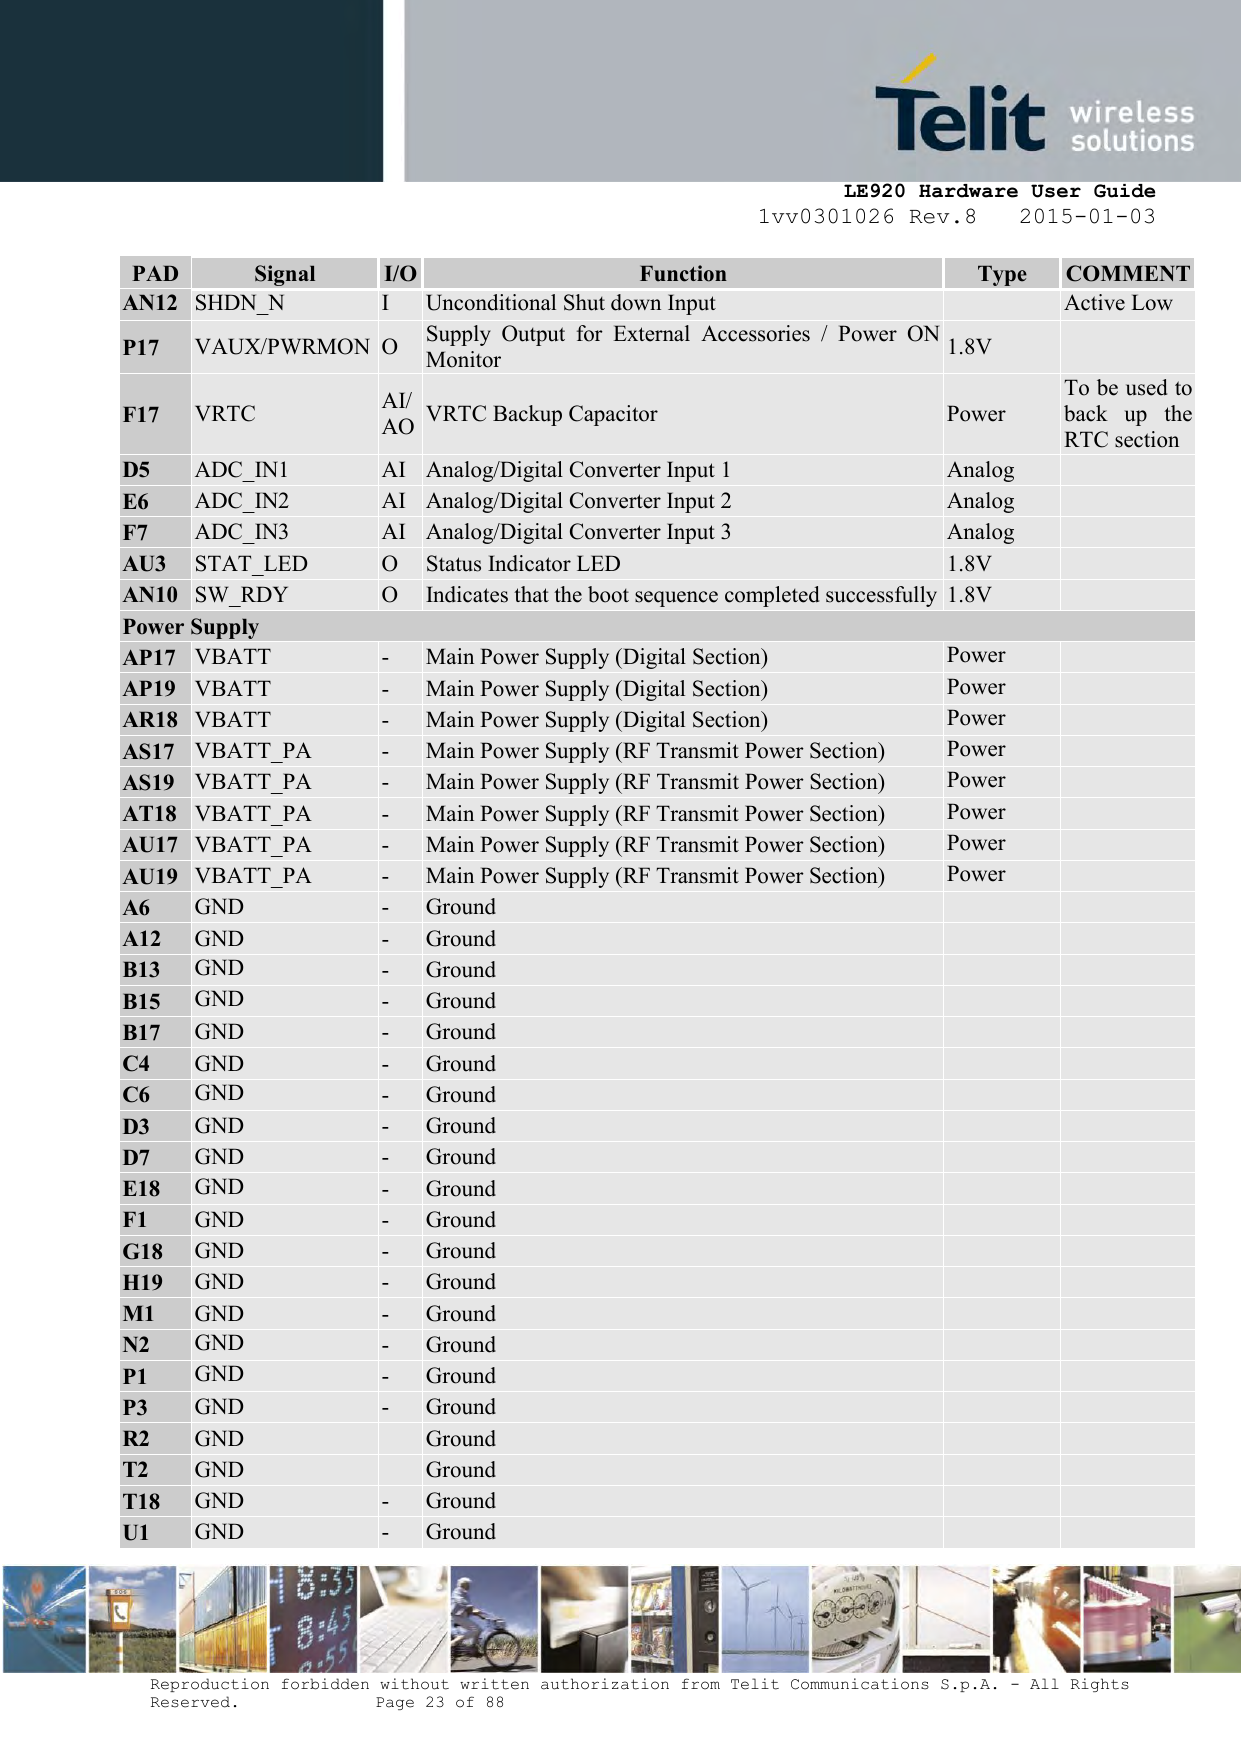     LE920 Hardware User Guide 1vv0301026 Rev.8   2015-01-03 Reproduction forbidden without written authorization from Telit Communications S.p.A. - All Rights Reserved.    Page 23 of 88  PAD Signal I/O Function Type COMMENT AN12 SHDN_N I Unconditional Shut down Input  Active Low P17 VAUX/PWRMON O Supply  Output  for  External  Accessories  /  Power  ON Monitor 1.8V  F17 VRTC AI/ AO VRTC Backup Capacitor Power To be used to back  up  the RTC section D5 ADC_IN1 AI Analog/Digital Converter Input 1 Analog  E6 ADC_IN2 AI Analog/Digital Converter Input 2 Analog  F7 ADC_IN3 AI Analog/Digital Converter Input 3 Analog  AU3 STAT_LED O Status Indicator LED 1.8V  AN10 SW_RDY O Indicates that the boot sequence completed successfully 1.8V  Power Supply AP17 VBATT - Main Power Supply (Digital Section) Power  AP19 VBATT - Main Power Supply (Digital Section) Power  AR18 VBATT - Main Power Supply (Digital Section) Power  AS17 VBATT_PA - Main Power Supply (RF Transmit Power Section) Power  AS19 VBATT_PA - Main Power Supply (RF Transmit Power Section) Power  AT18 VBATT_PA - Main Power Supply (RF Transmit Power Section) Power  AU17 VBATT_PA - Main Power Supply (RF Transmit Power Section) Power  AU19 VBATT_PA - Main Power Supply (RF Transmit Power Section) Power  A6 GND - Ground   A12 GND - Ground   B13 GND - Ground   B15 GND - Ground   B17 GND - Ground   C4 GND - Ground   C6 GND - Ground   D3 GND - Ground   D7 GND - Ground   E18 GND - Ground   F1 GND - Ground   G18 GND - Ground   H19 GND - Ground   M1 GND - Ground   N2 GND - Ground   P1 GND - Ground   P3 GND - Ground   R2 GND  Ground   T2 GND  Ground   T18 GND - Ground   U1 GND - Ground   